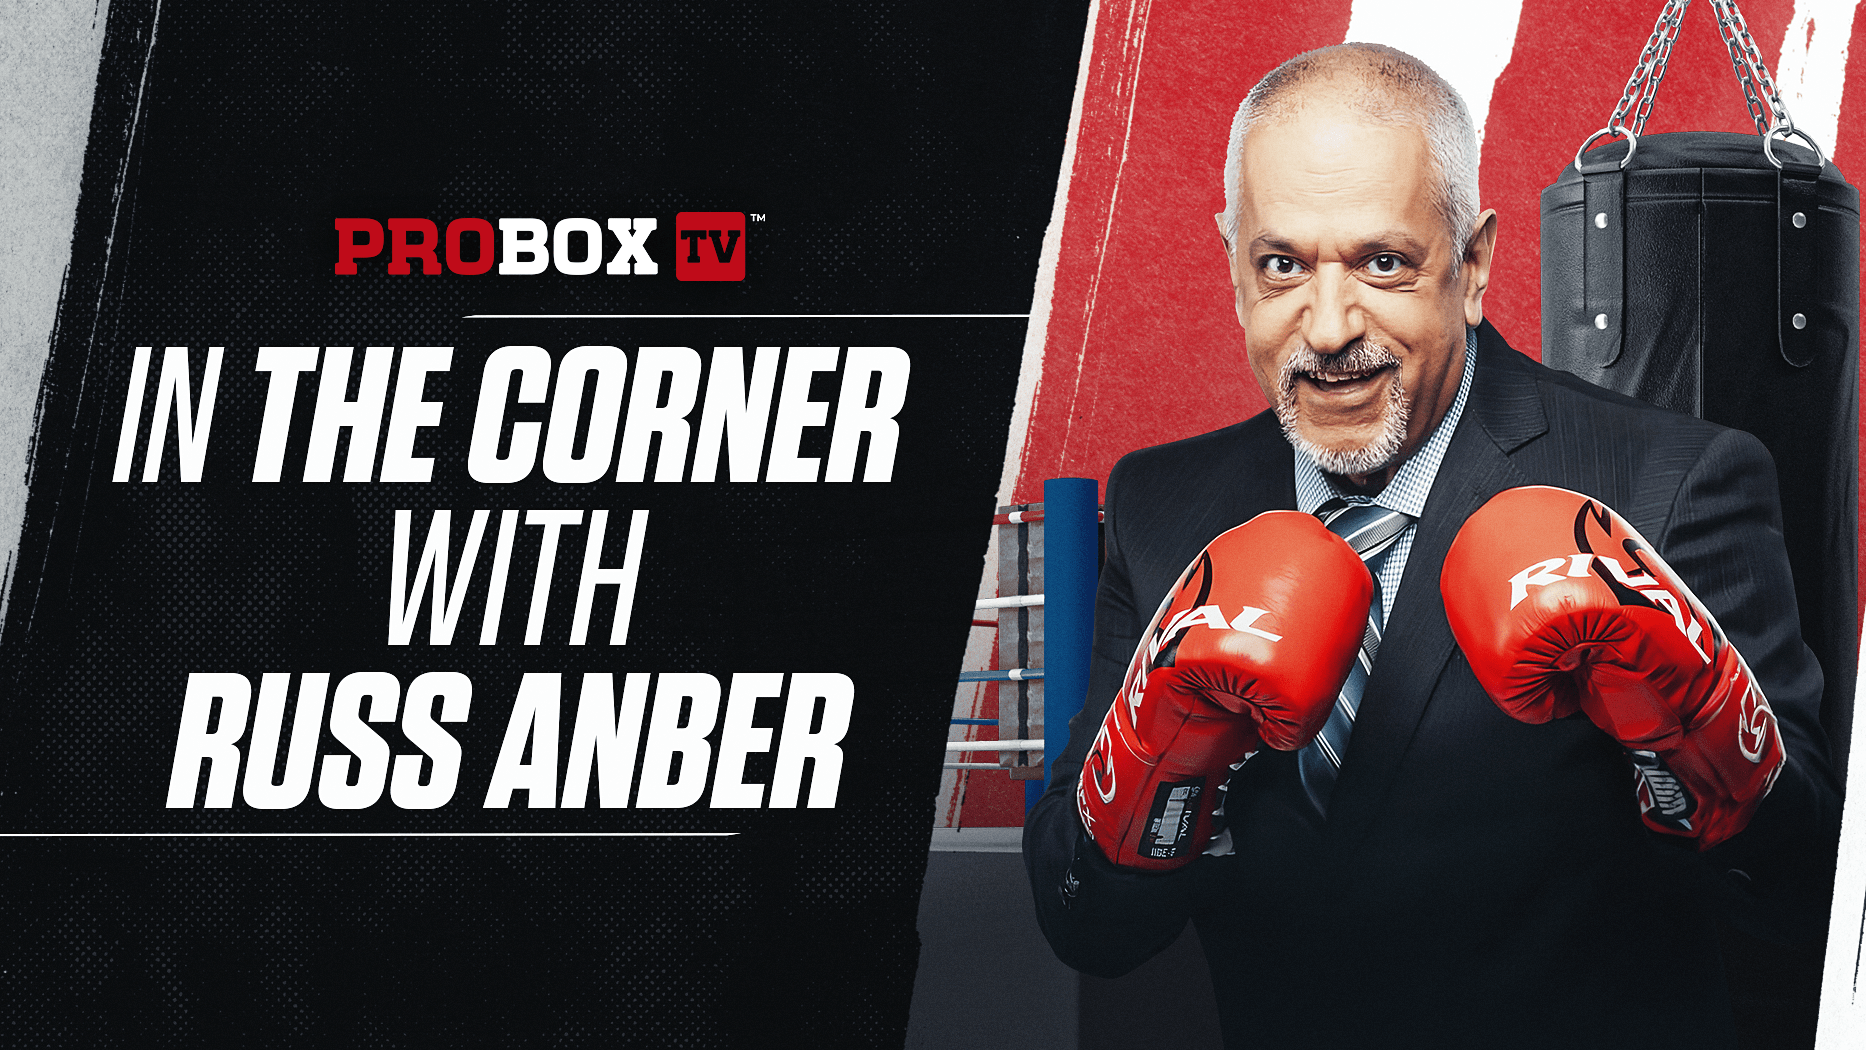 In The Corner with Russ Anber: Ryder was a throwback who kept alive the art of fighting on the inside